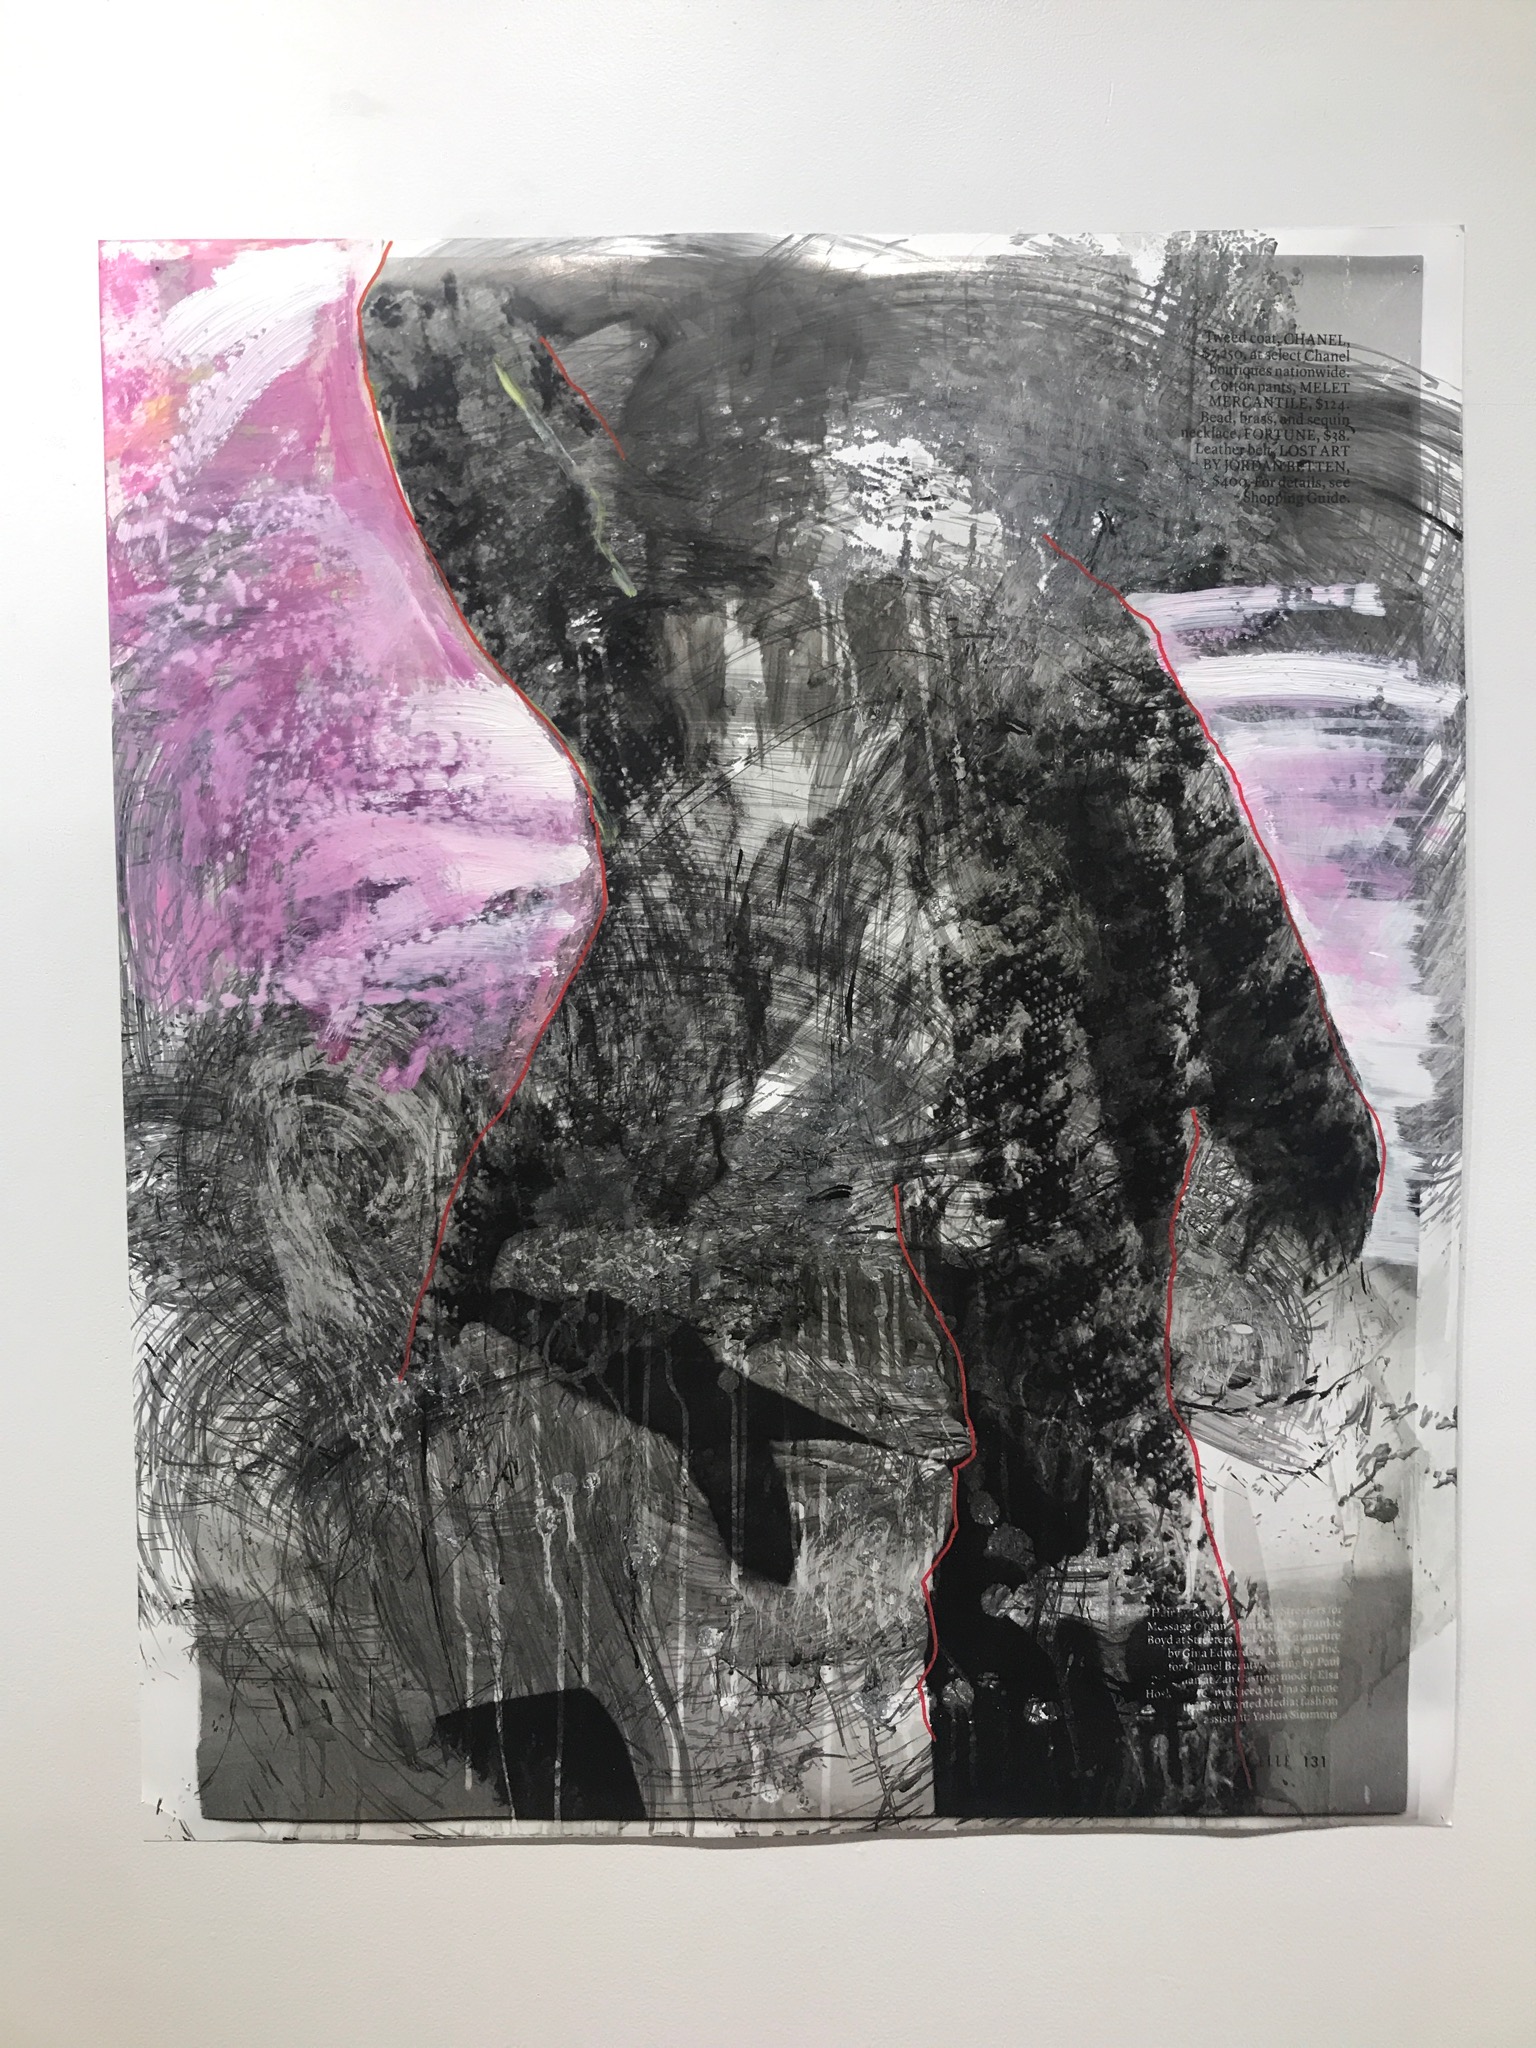   Elle 131   2018  43 x 36 in.  Citra solv on magazine, windex, bleach, acrylic, liquid acrylic, and marker on photo paper 